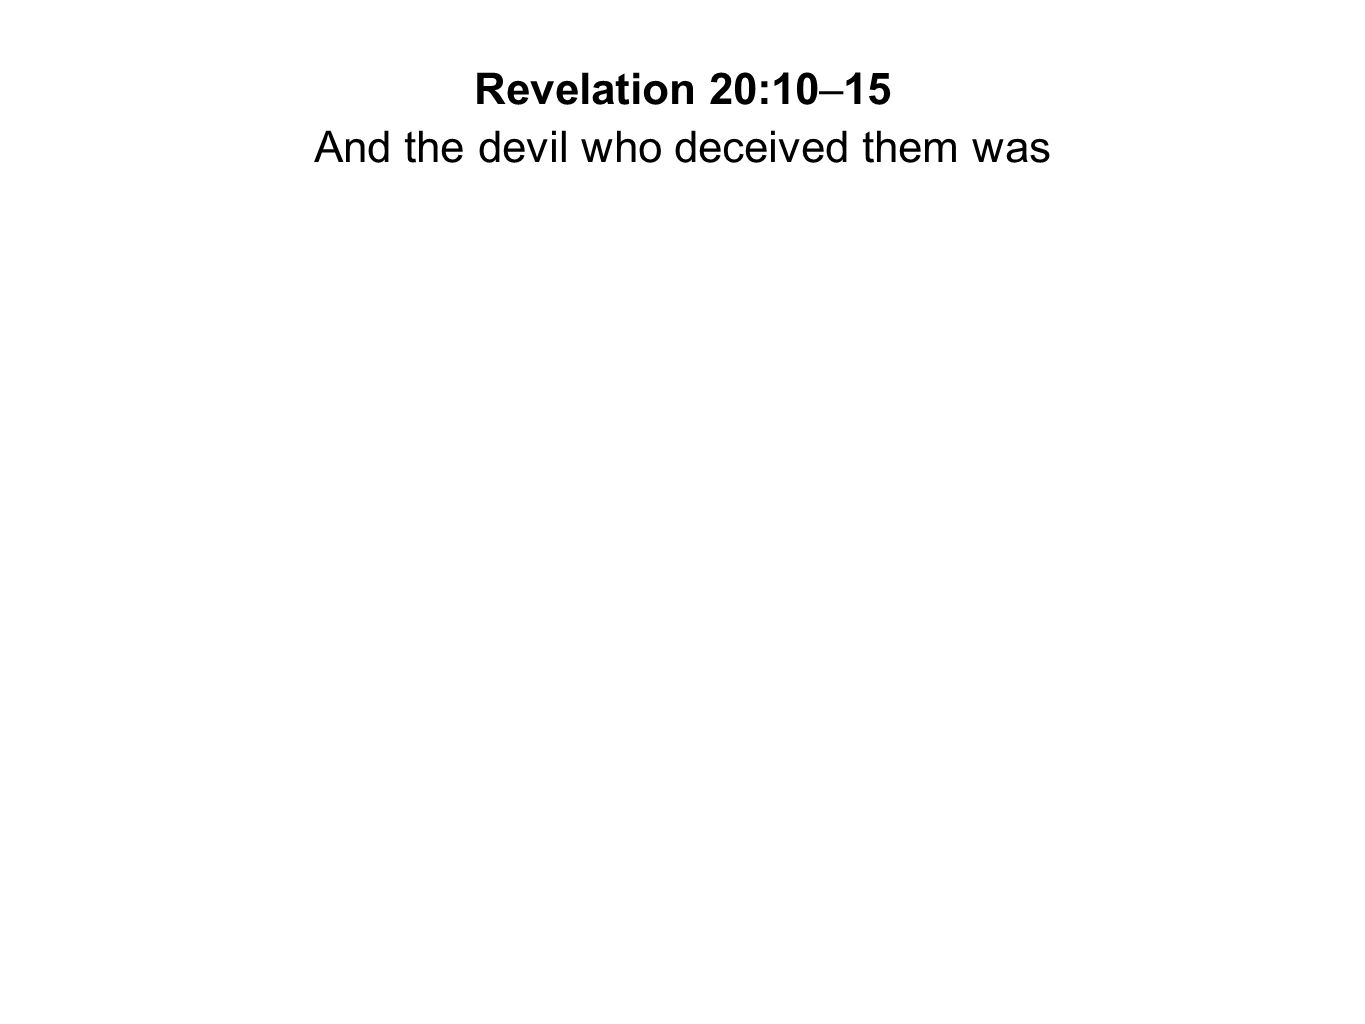 And the devil who deceived them was